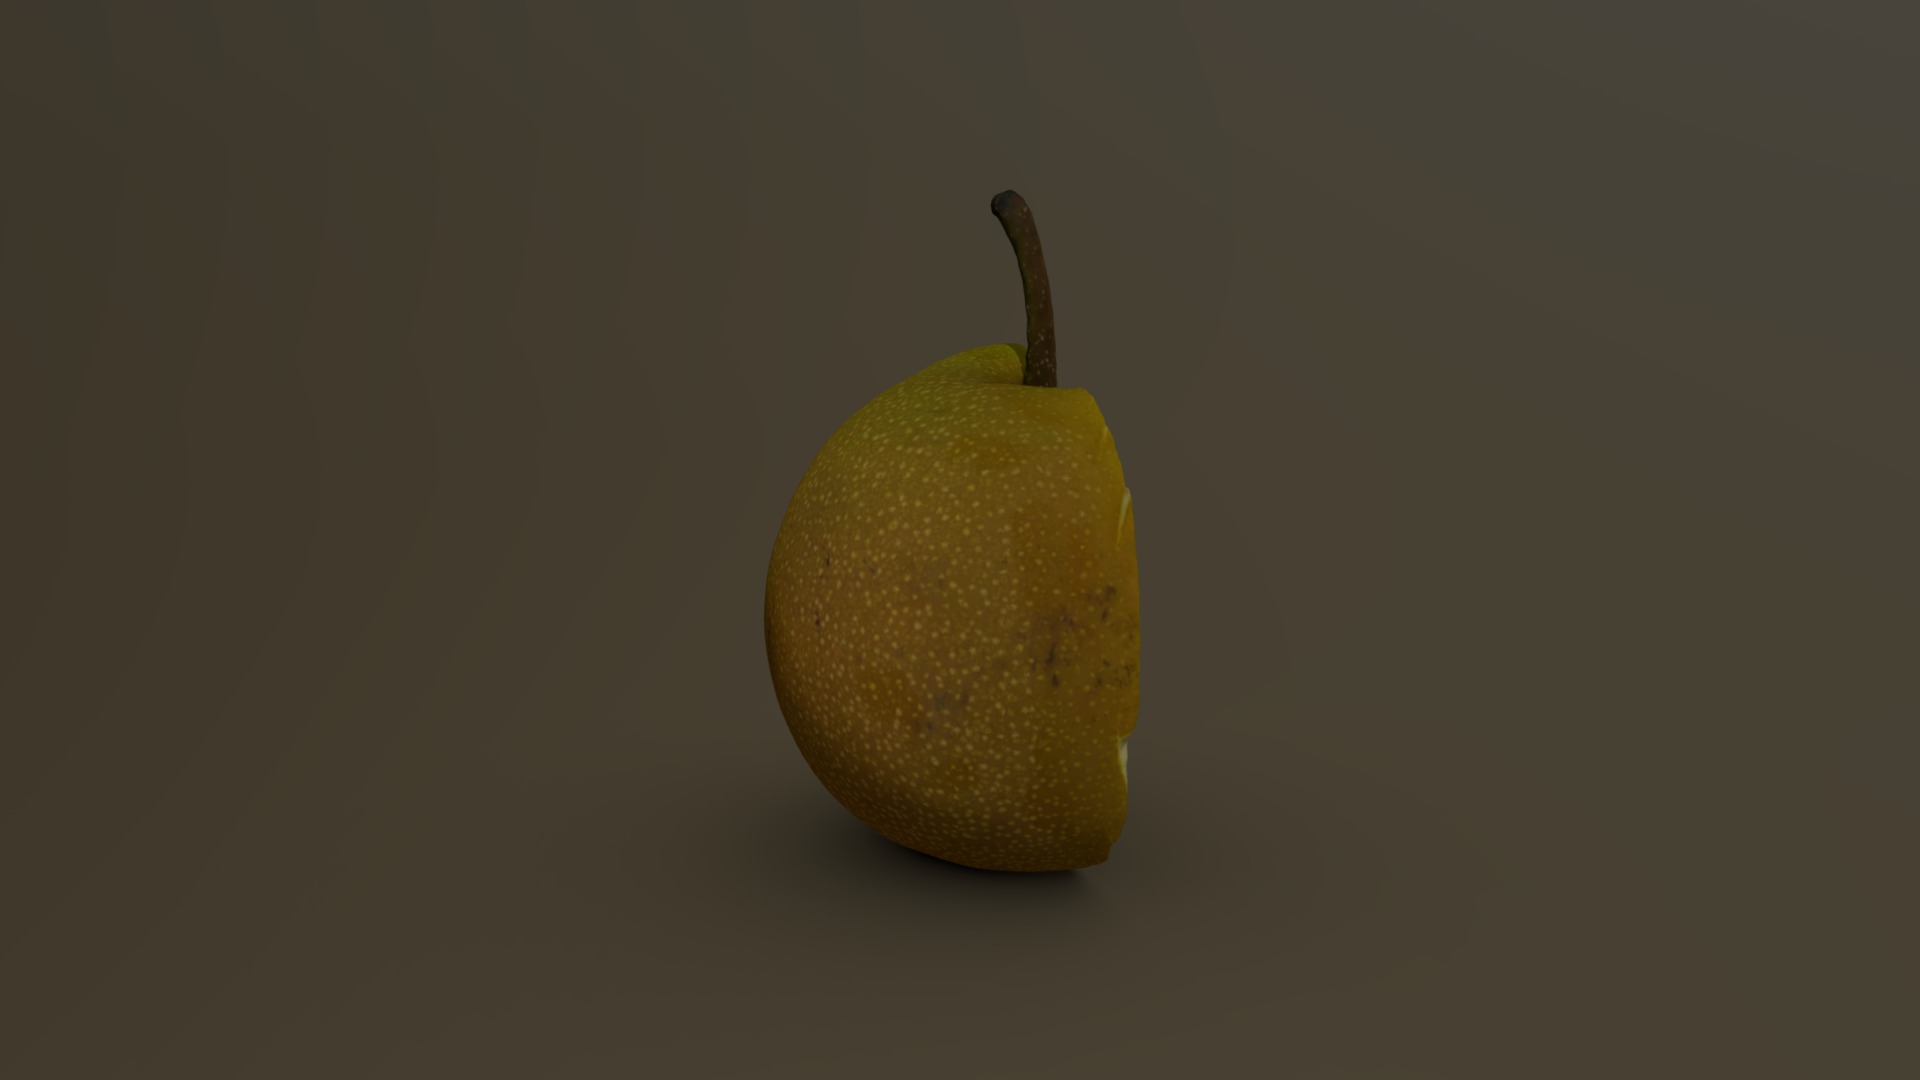 3D model Asian Pear Cut in Half 01 - This is a 3D model of the Asian Pear Cut in Half 01. The 3D model is about a yellow pear on a grey background.